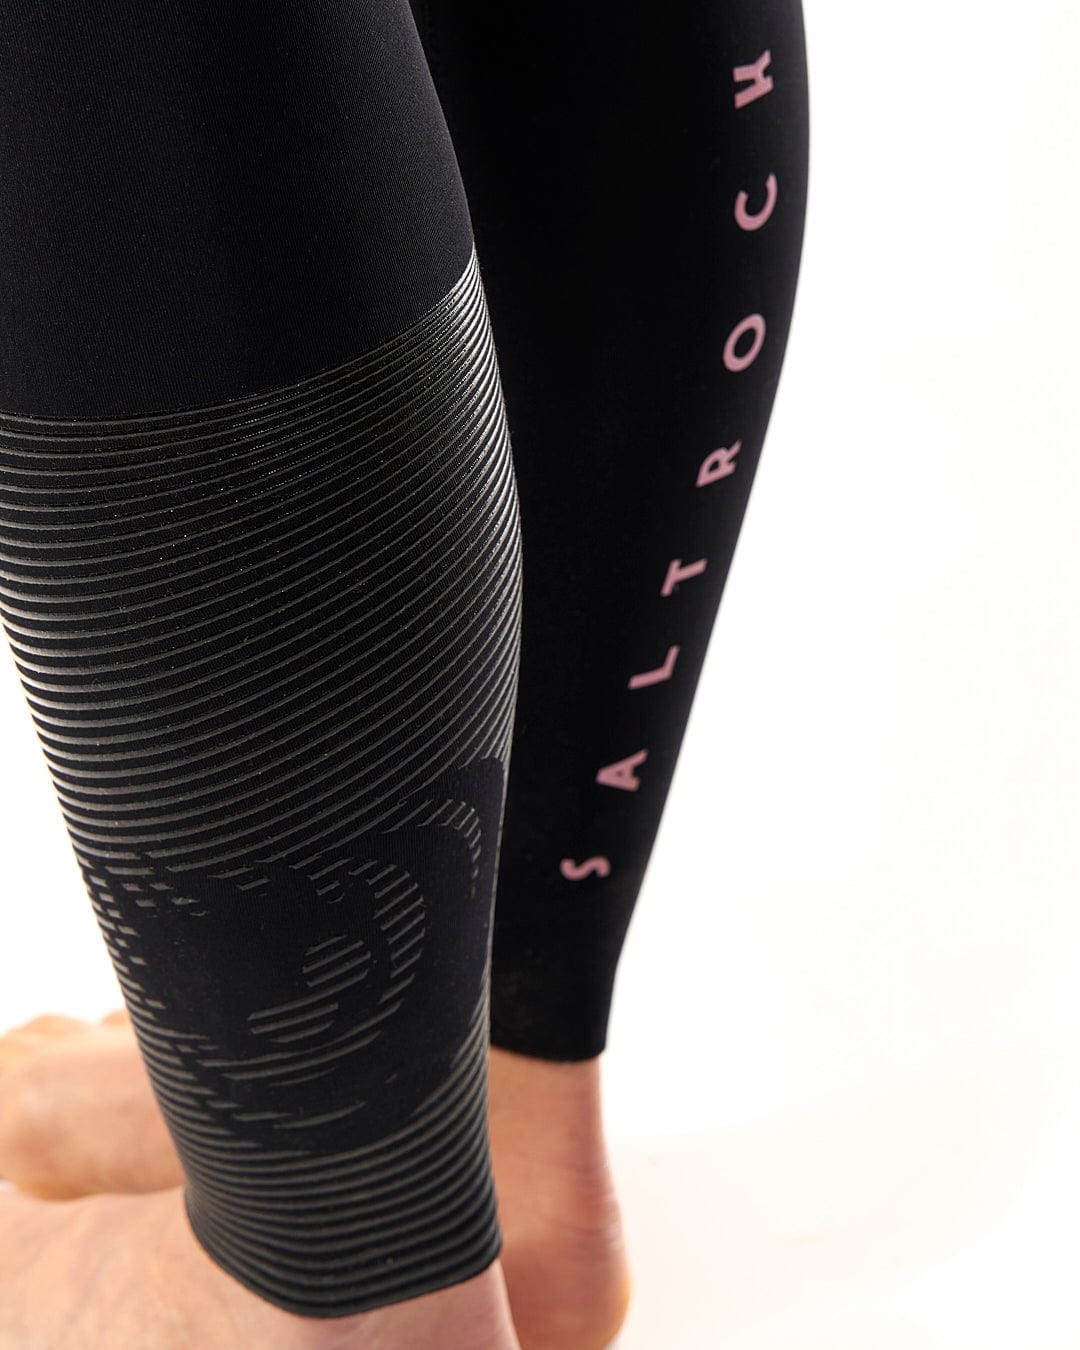 A woman's leg with the Saltrock Shockwave - Womens 3/2 Front Zip Full Wetsuit - Black on it.